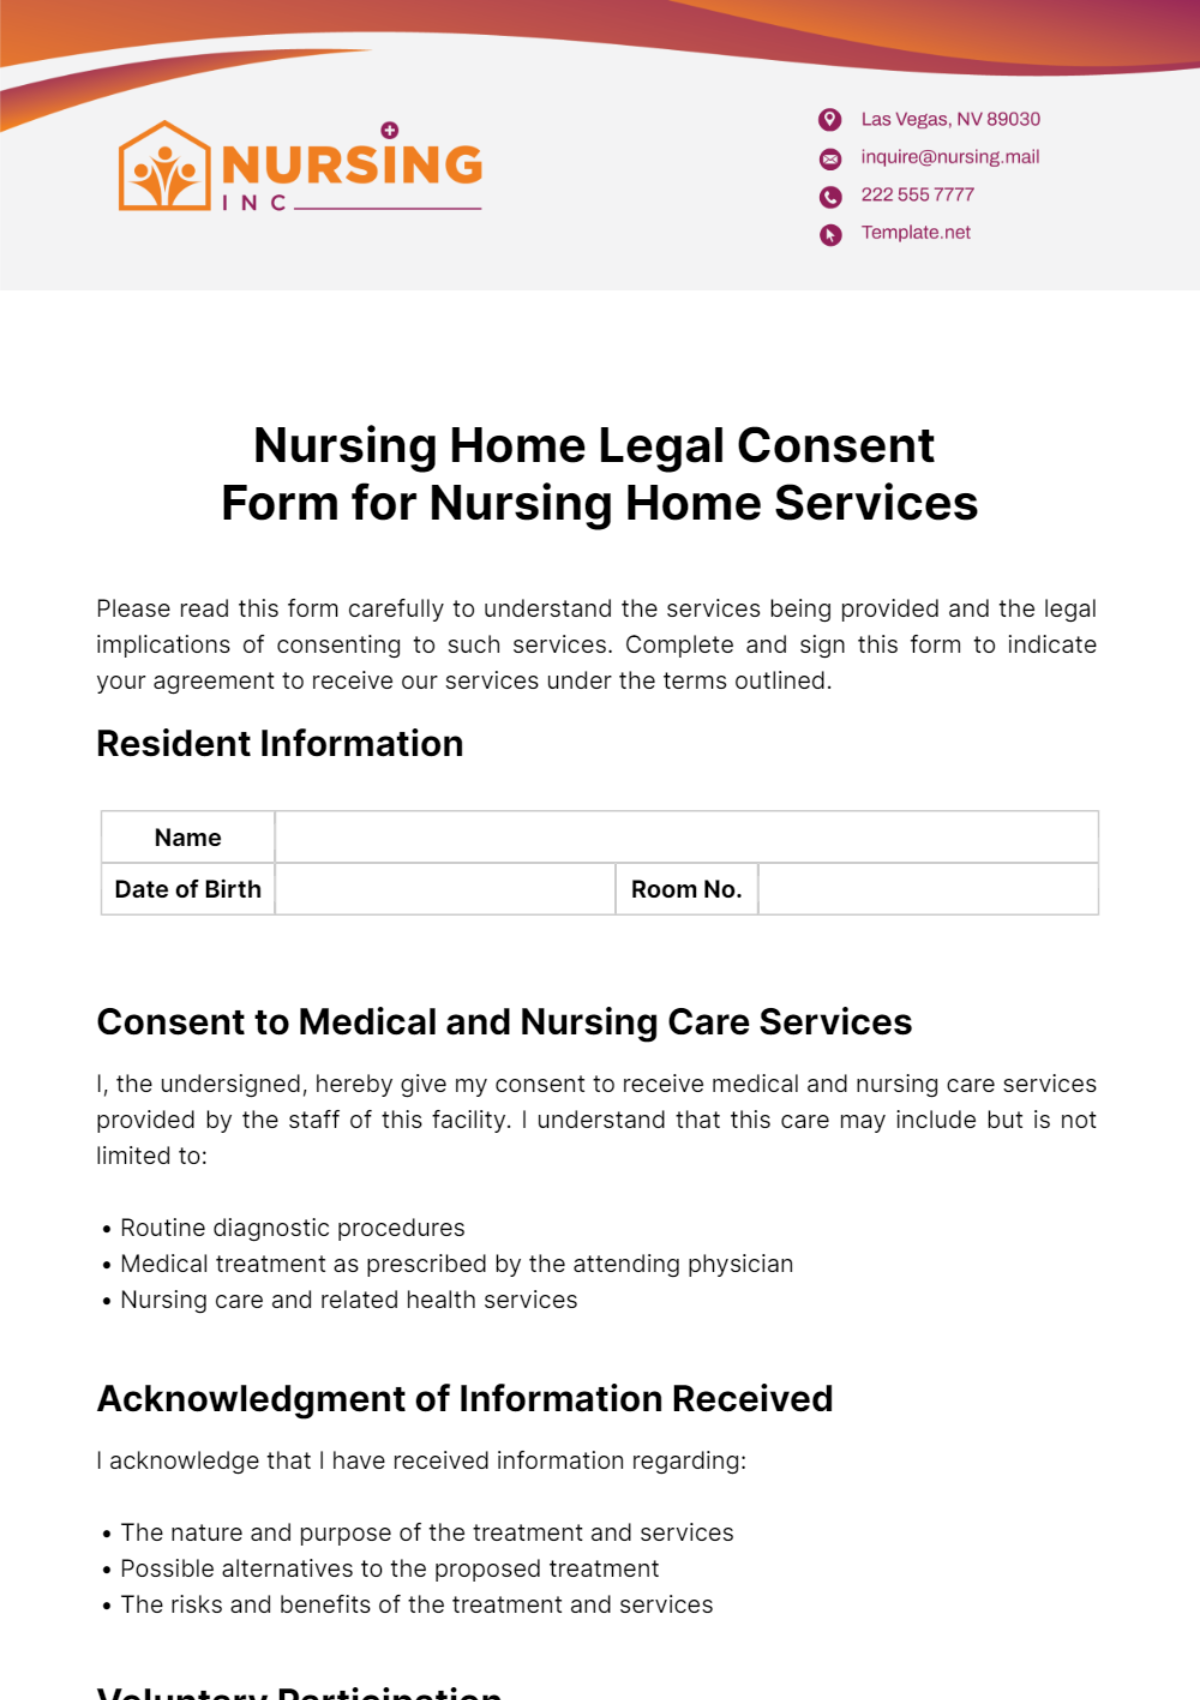 Nursing Home Legal Consent Forms for Nursing Home Services Template